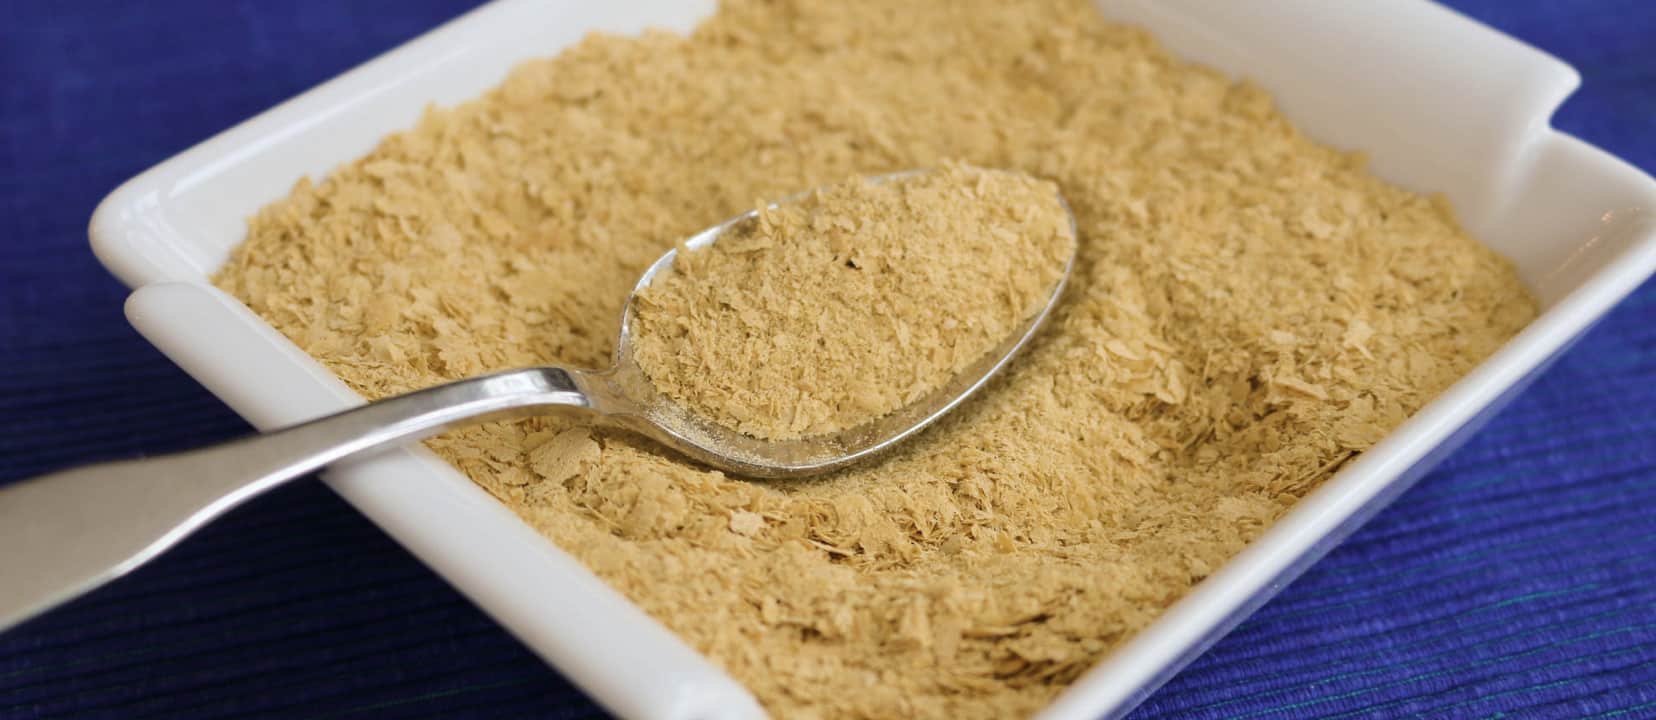 Benefits of Nutritional Yeast to Prevent the Common Cold